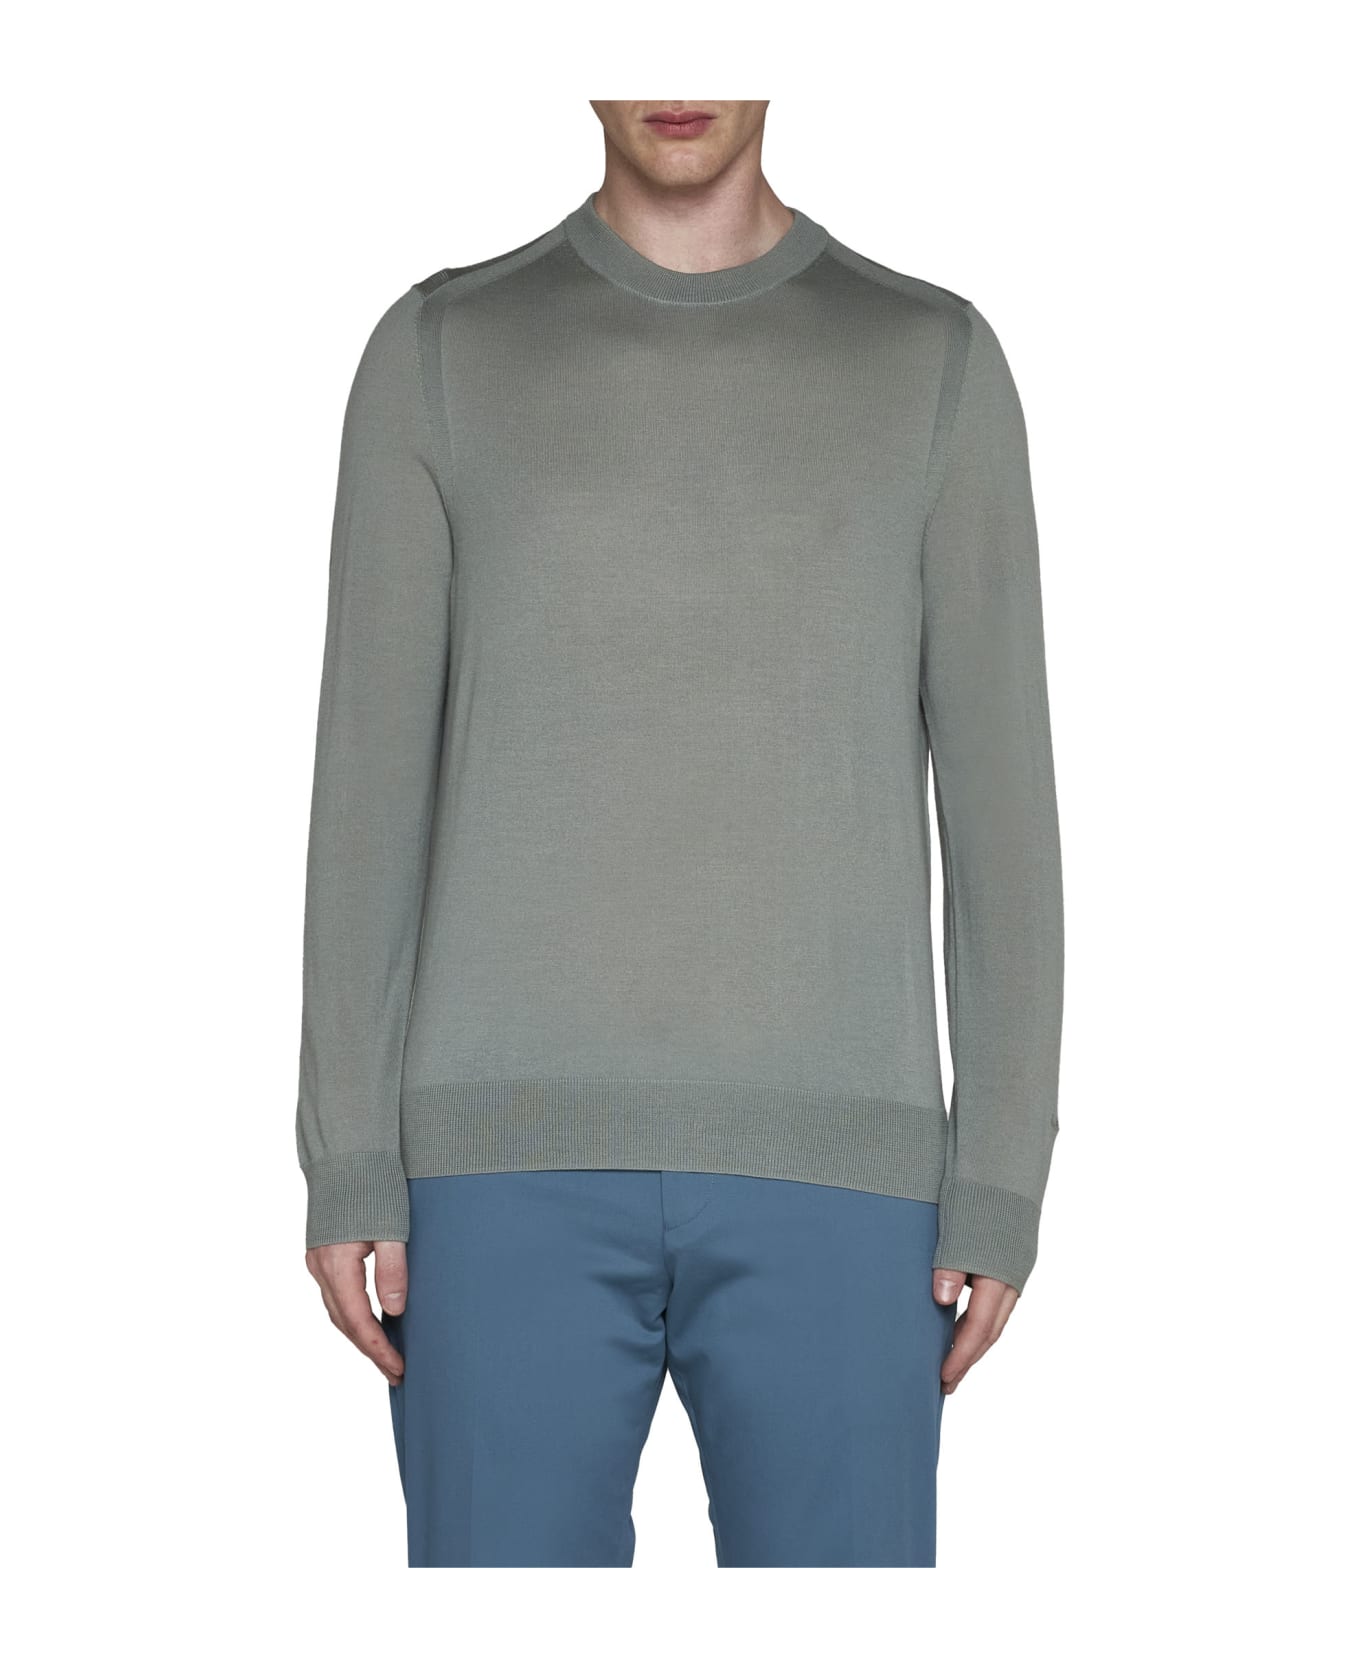 Paul Smith Sweater - Olive